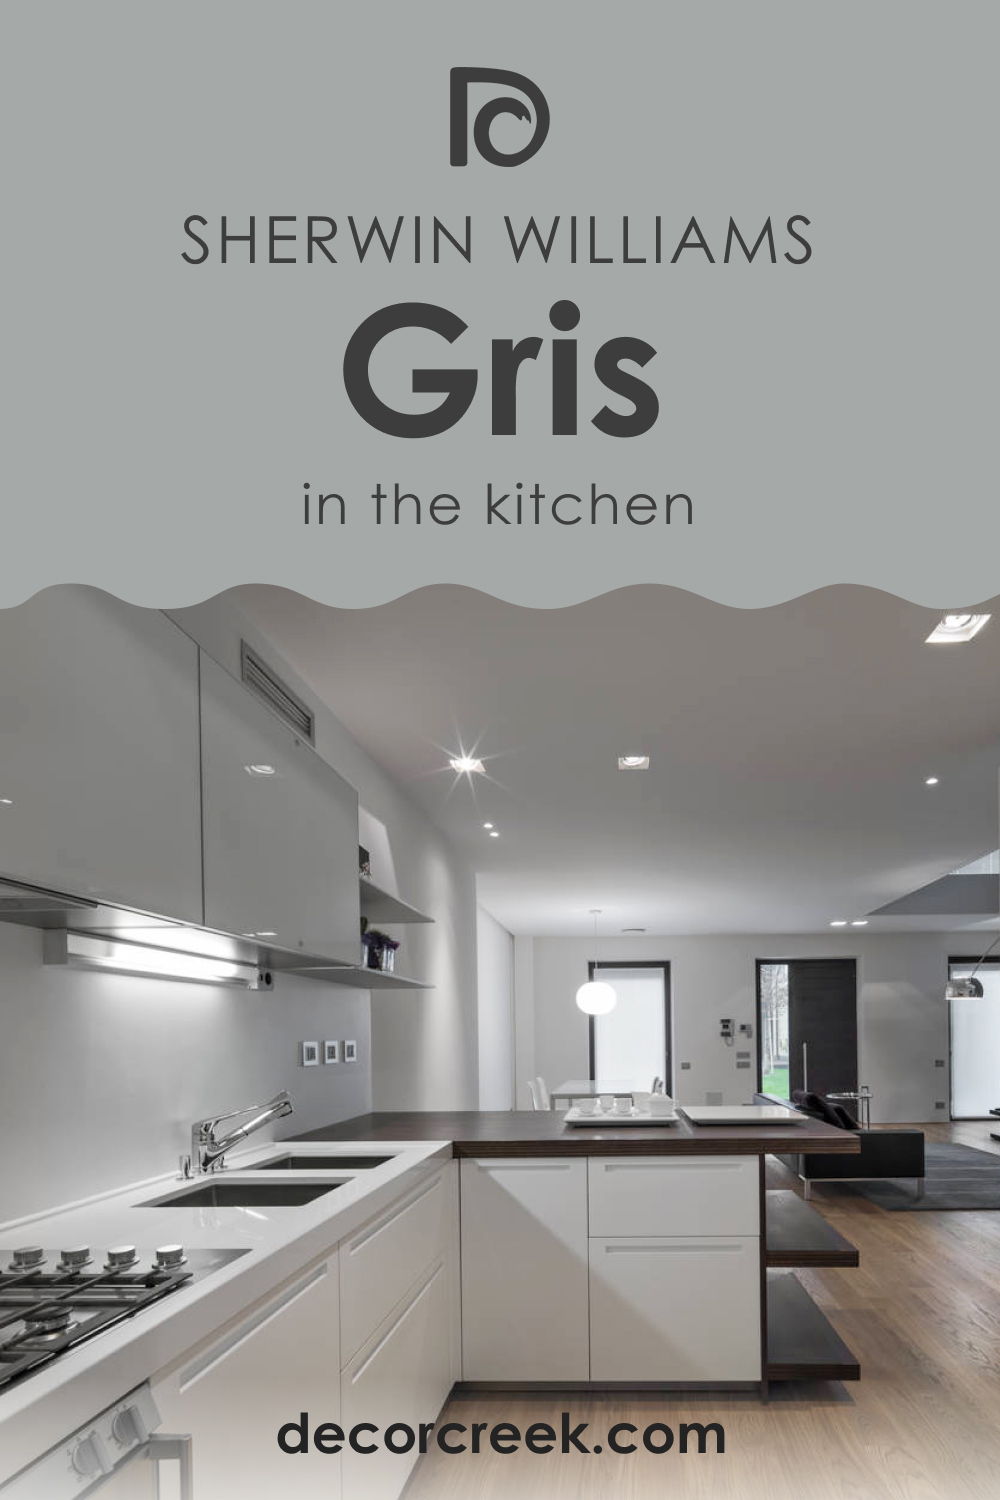 How to Use SW 7659 Gris for the Kitchen?